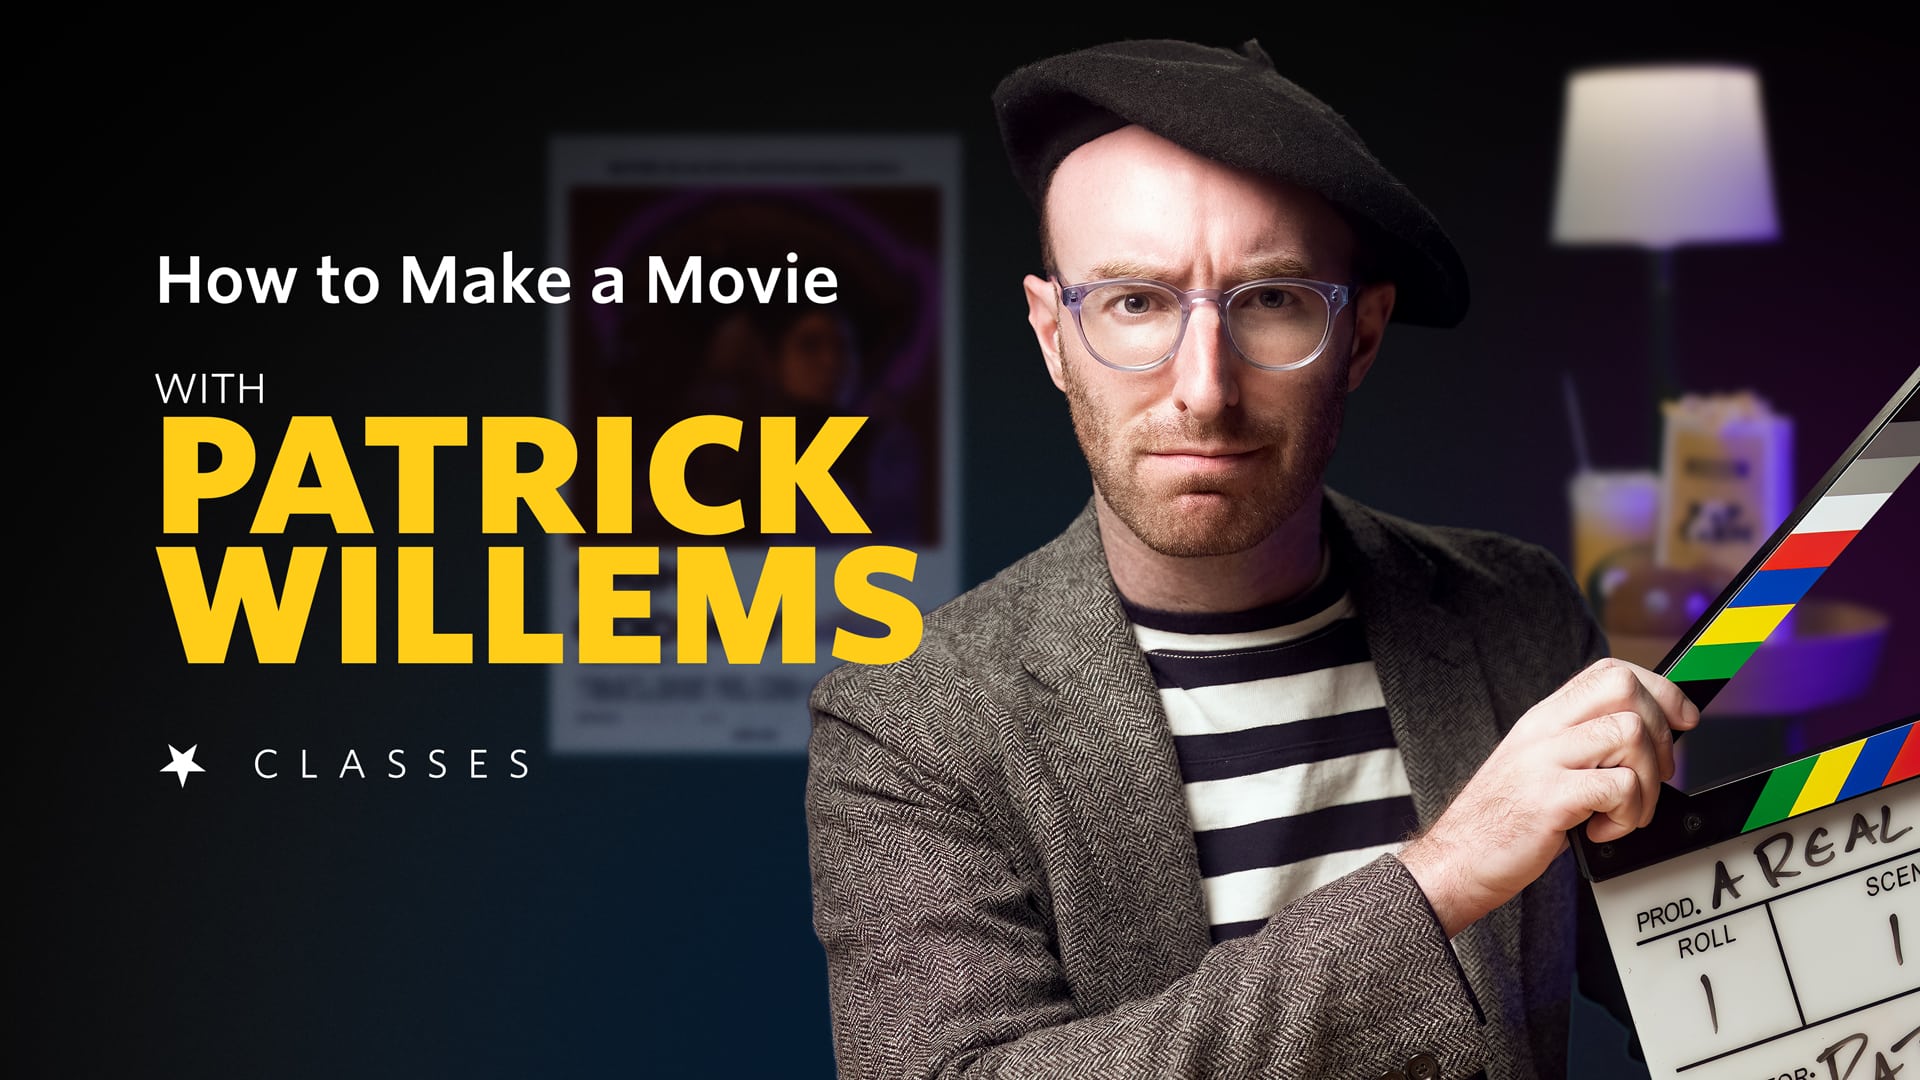 How to Make a Movie by Patrick Willems